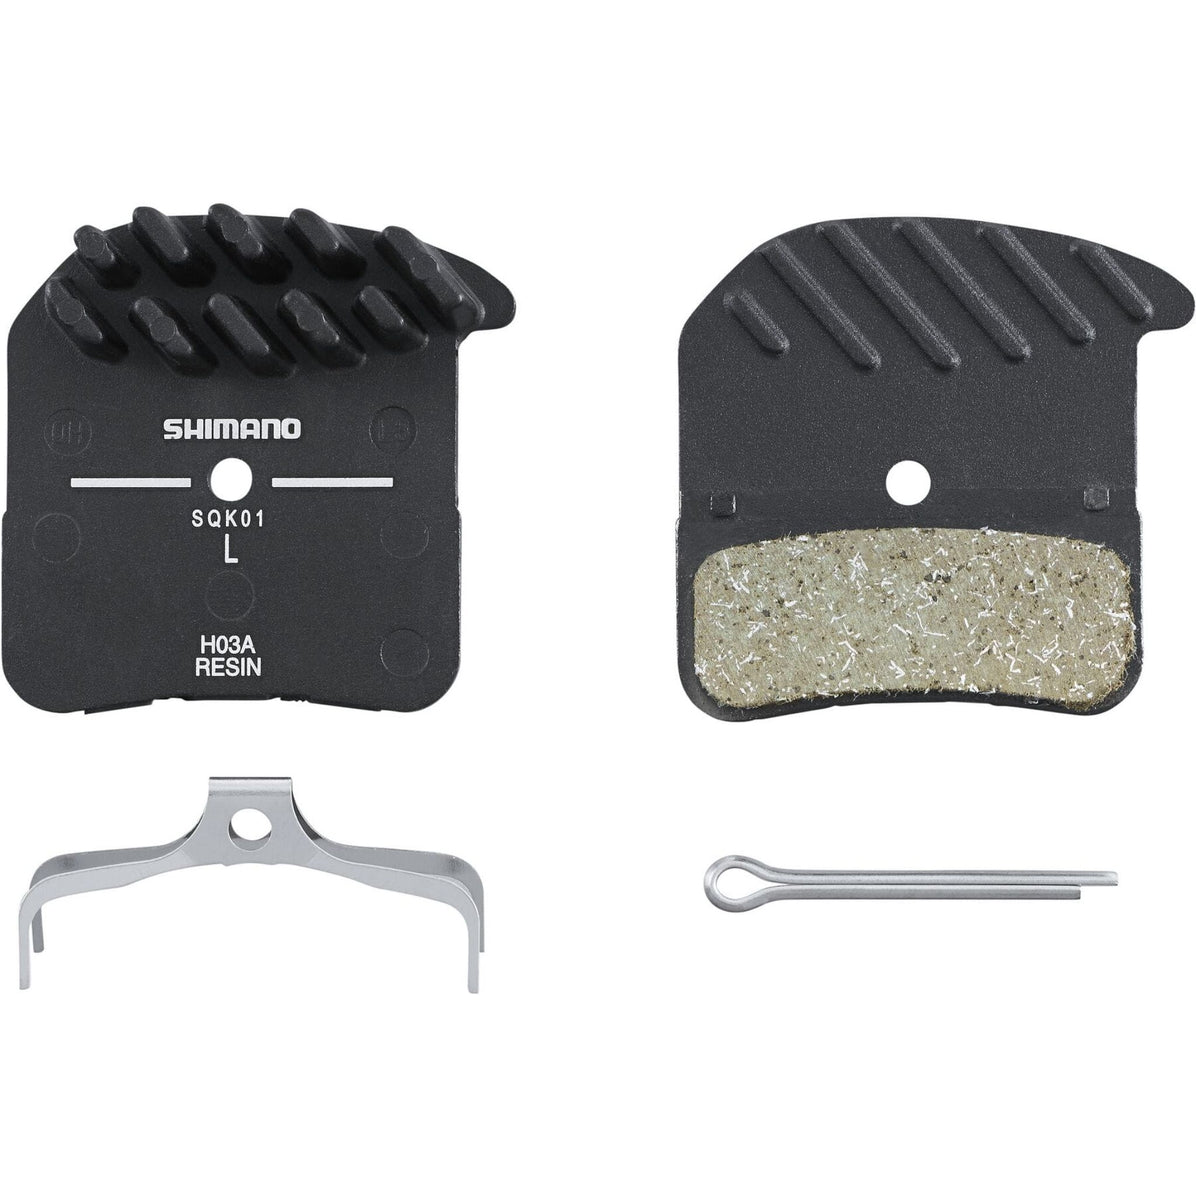 Shimano H03A Saint Resin Disc Brake Pads with Cooling Fins